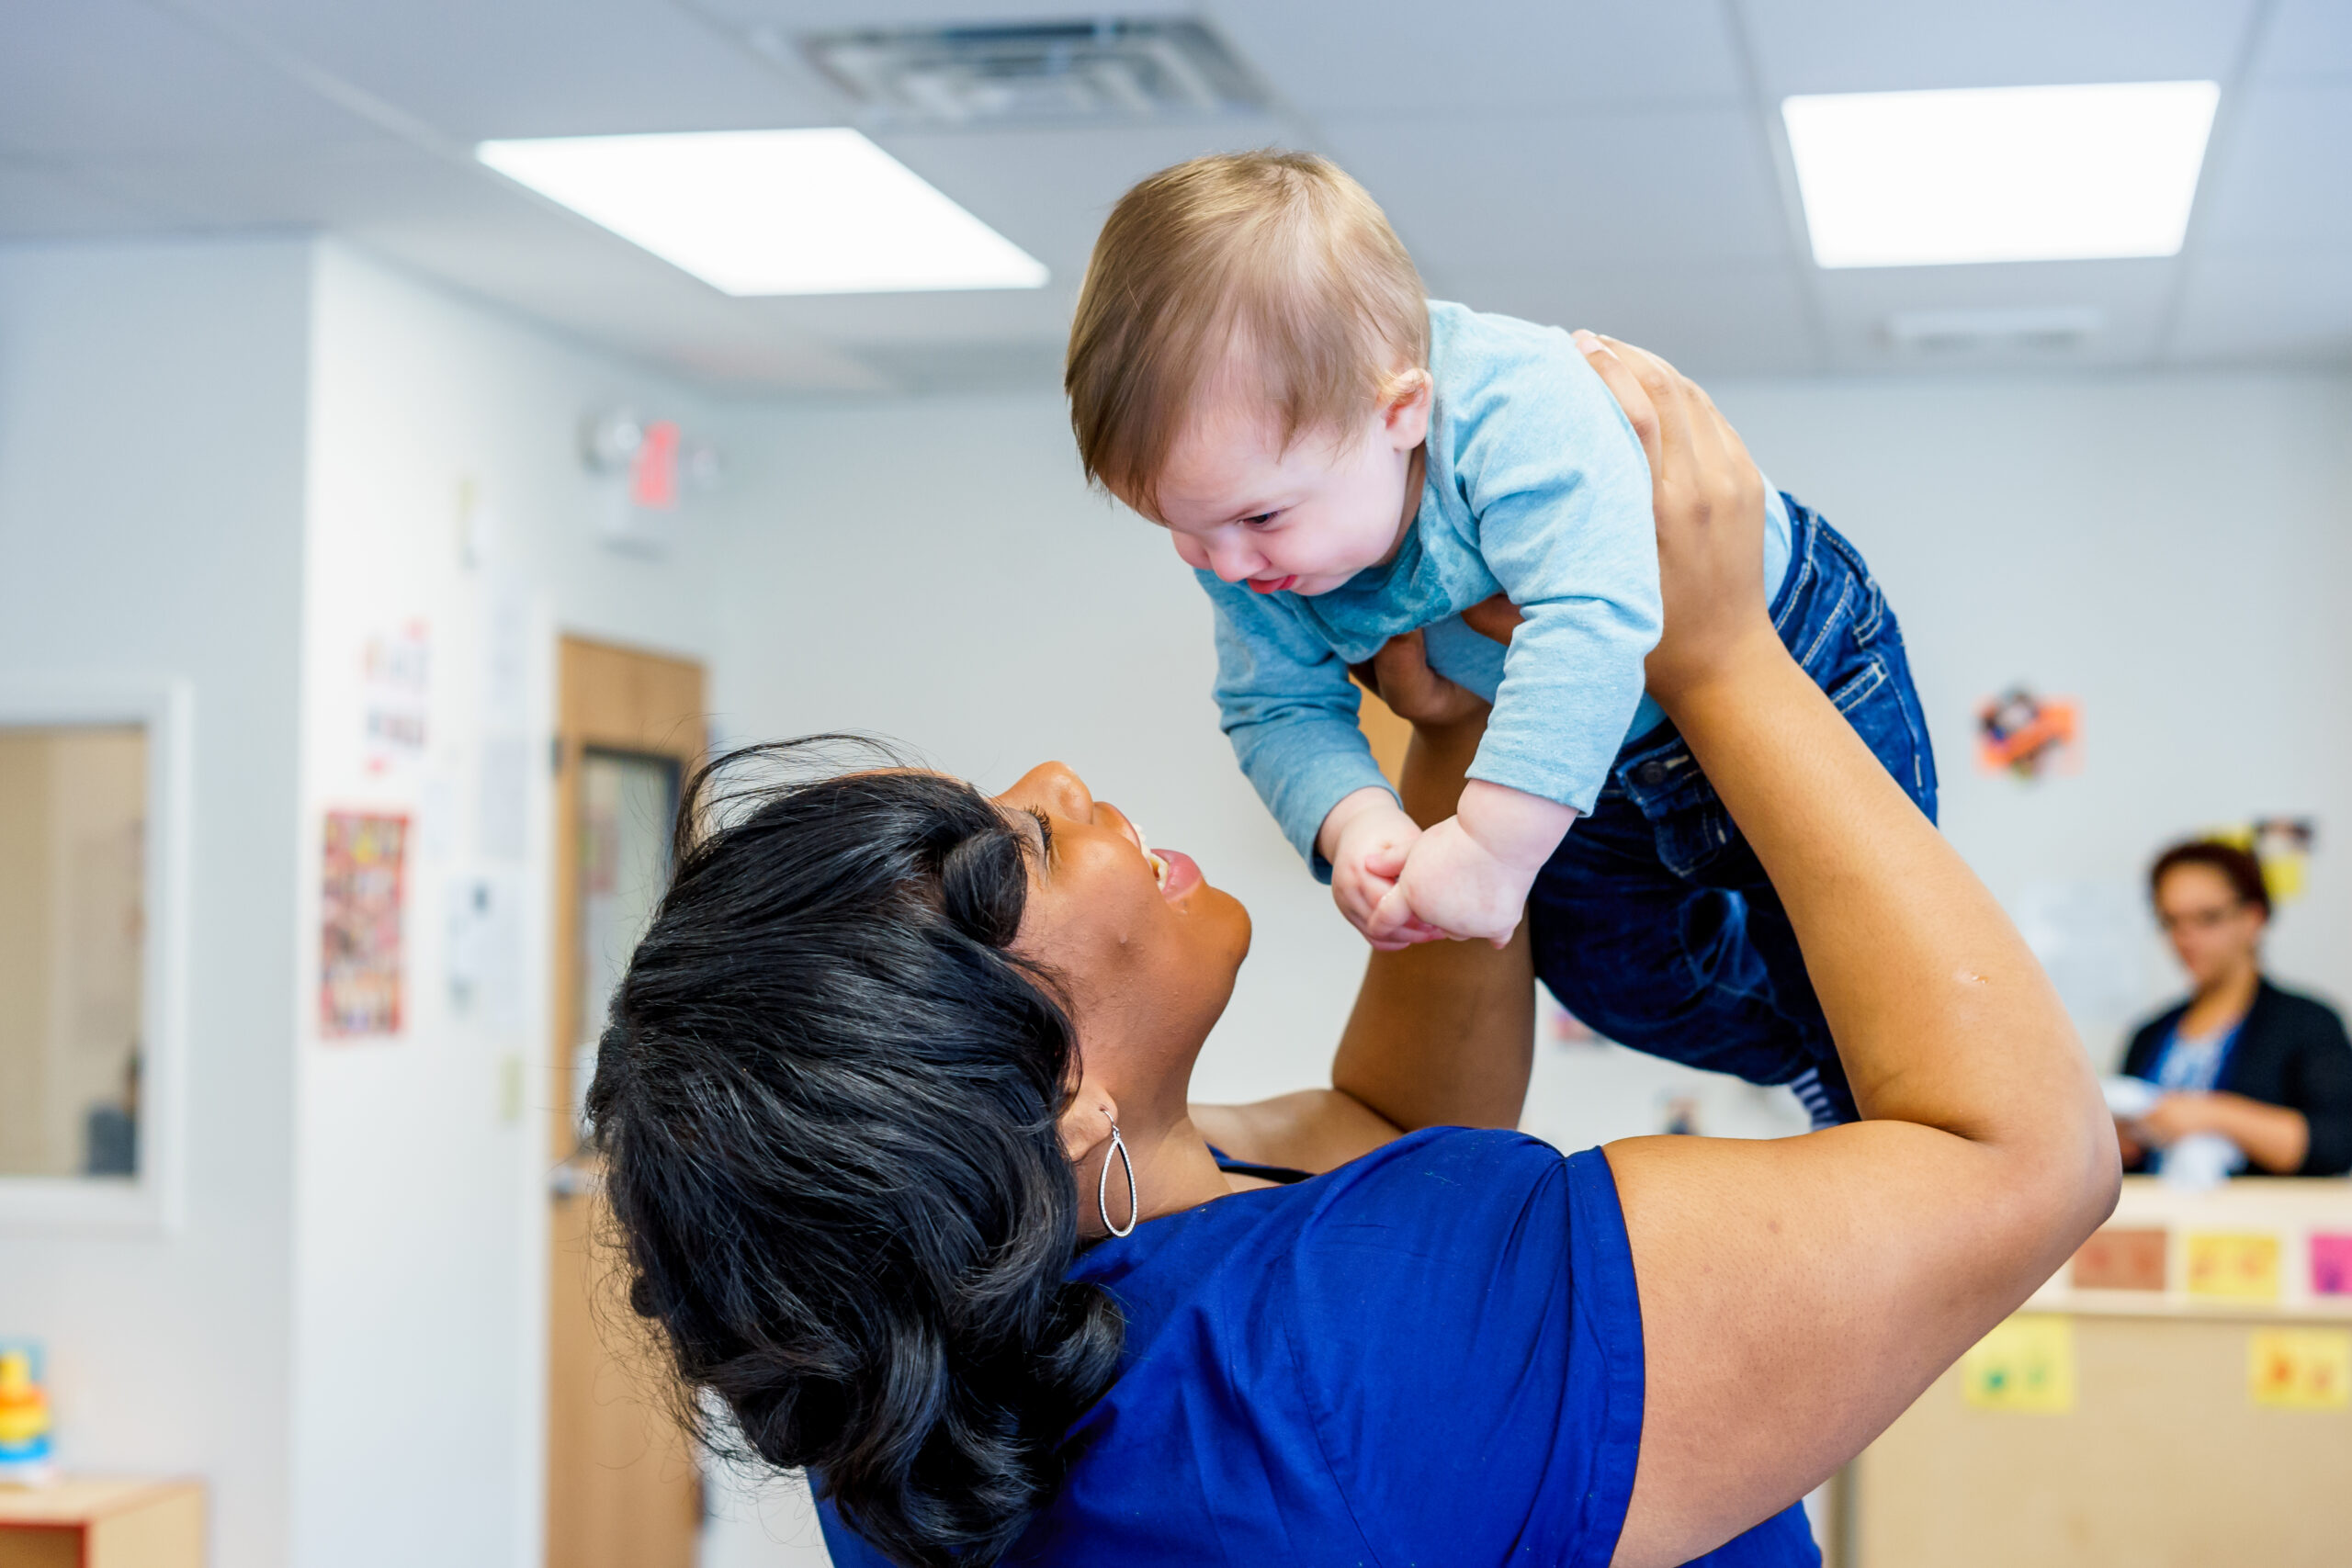 Teacher holding infant up in the air